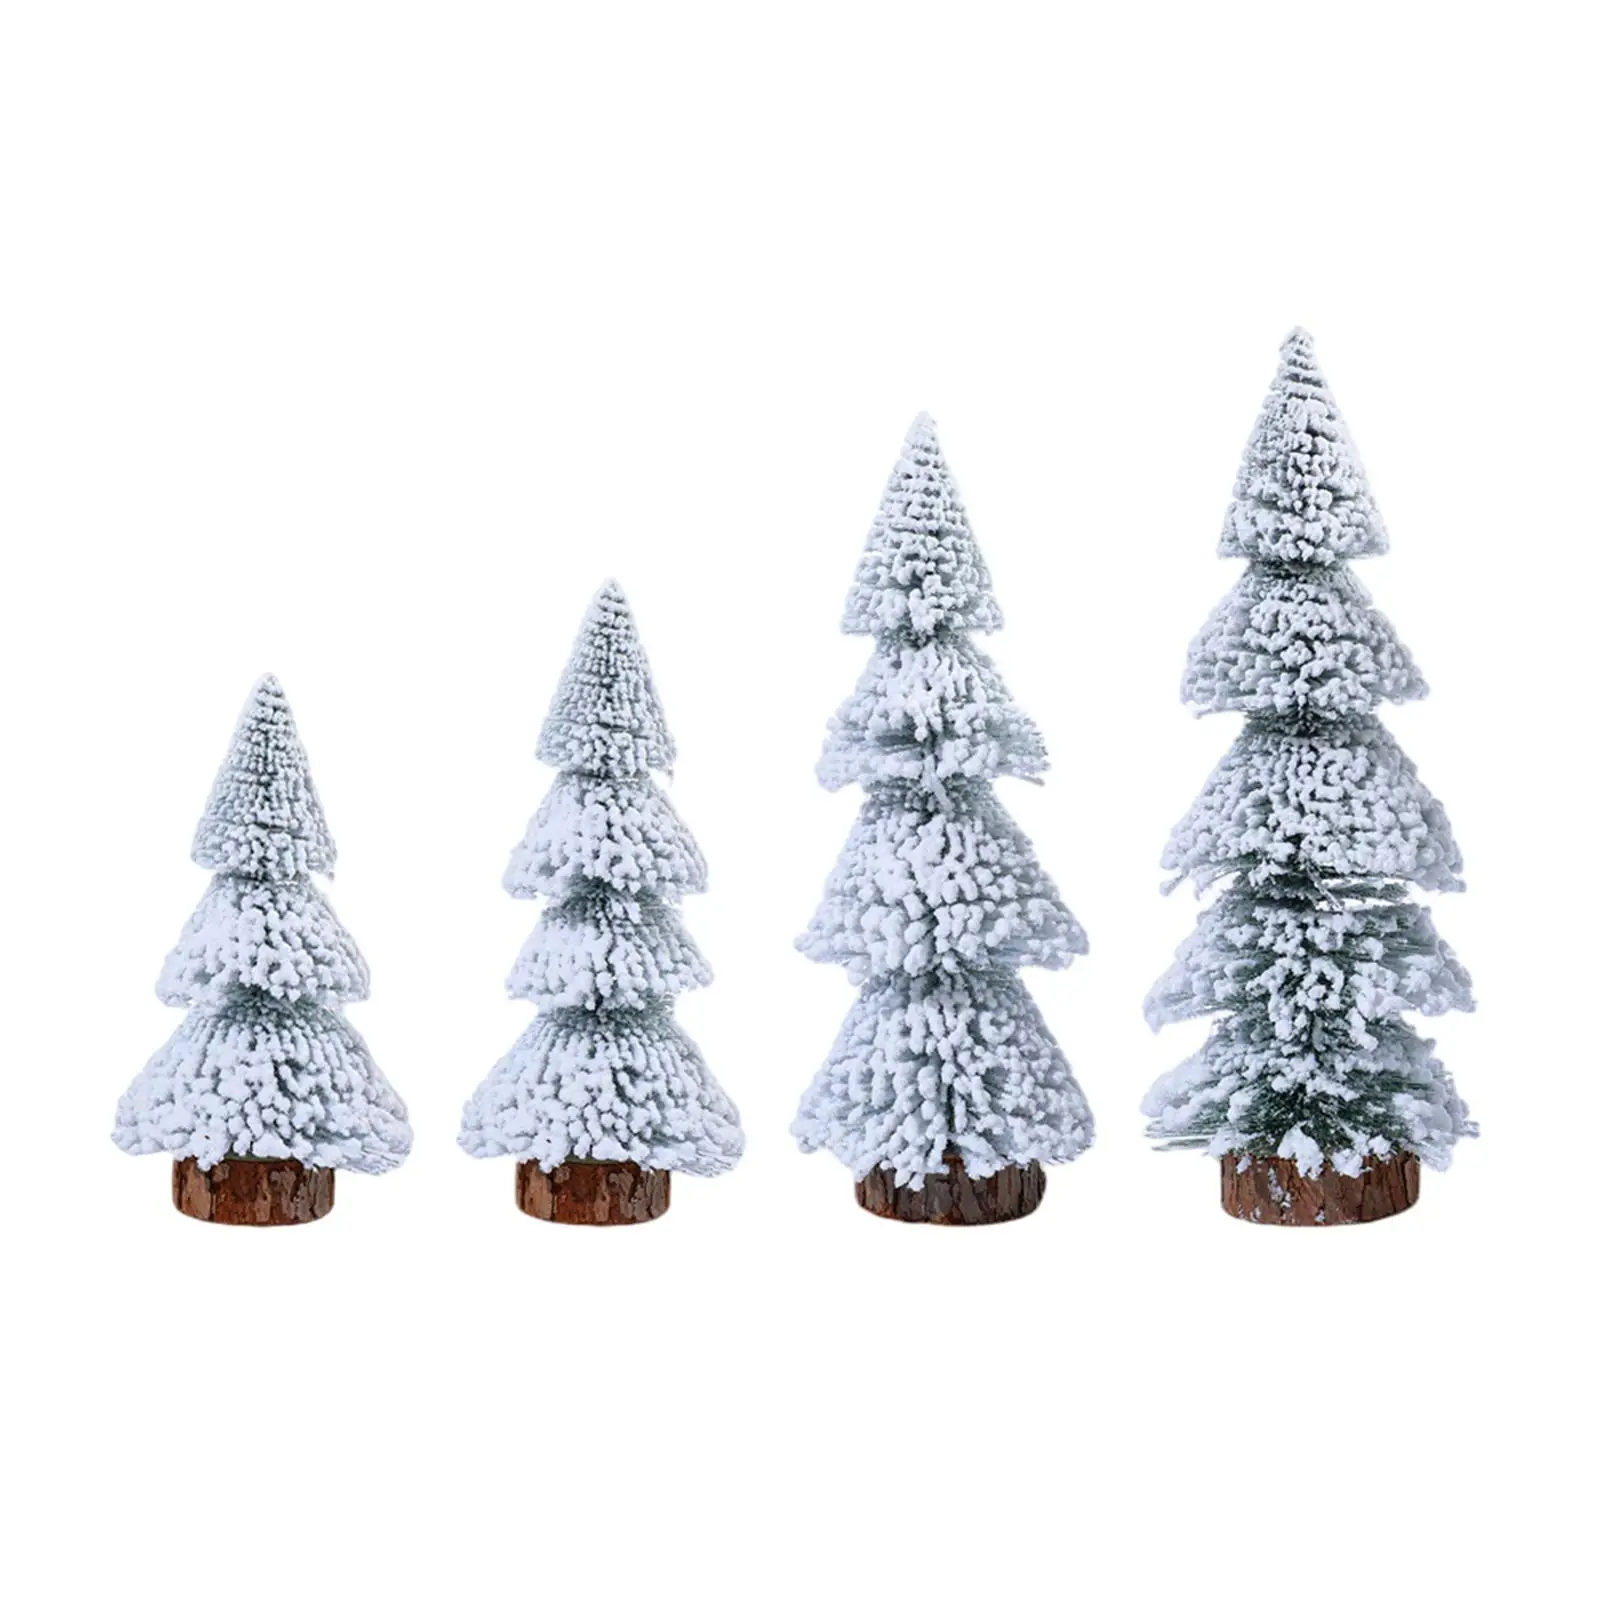 Tabletop Christmas Tree Display Vintage Rustic Wood Base Snow Flocked Christmas Tree for Table Home Fireplace Indoor Decorations